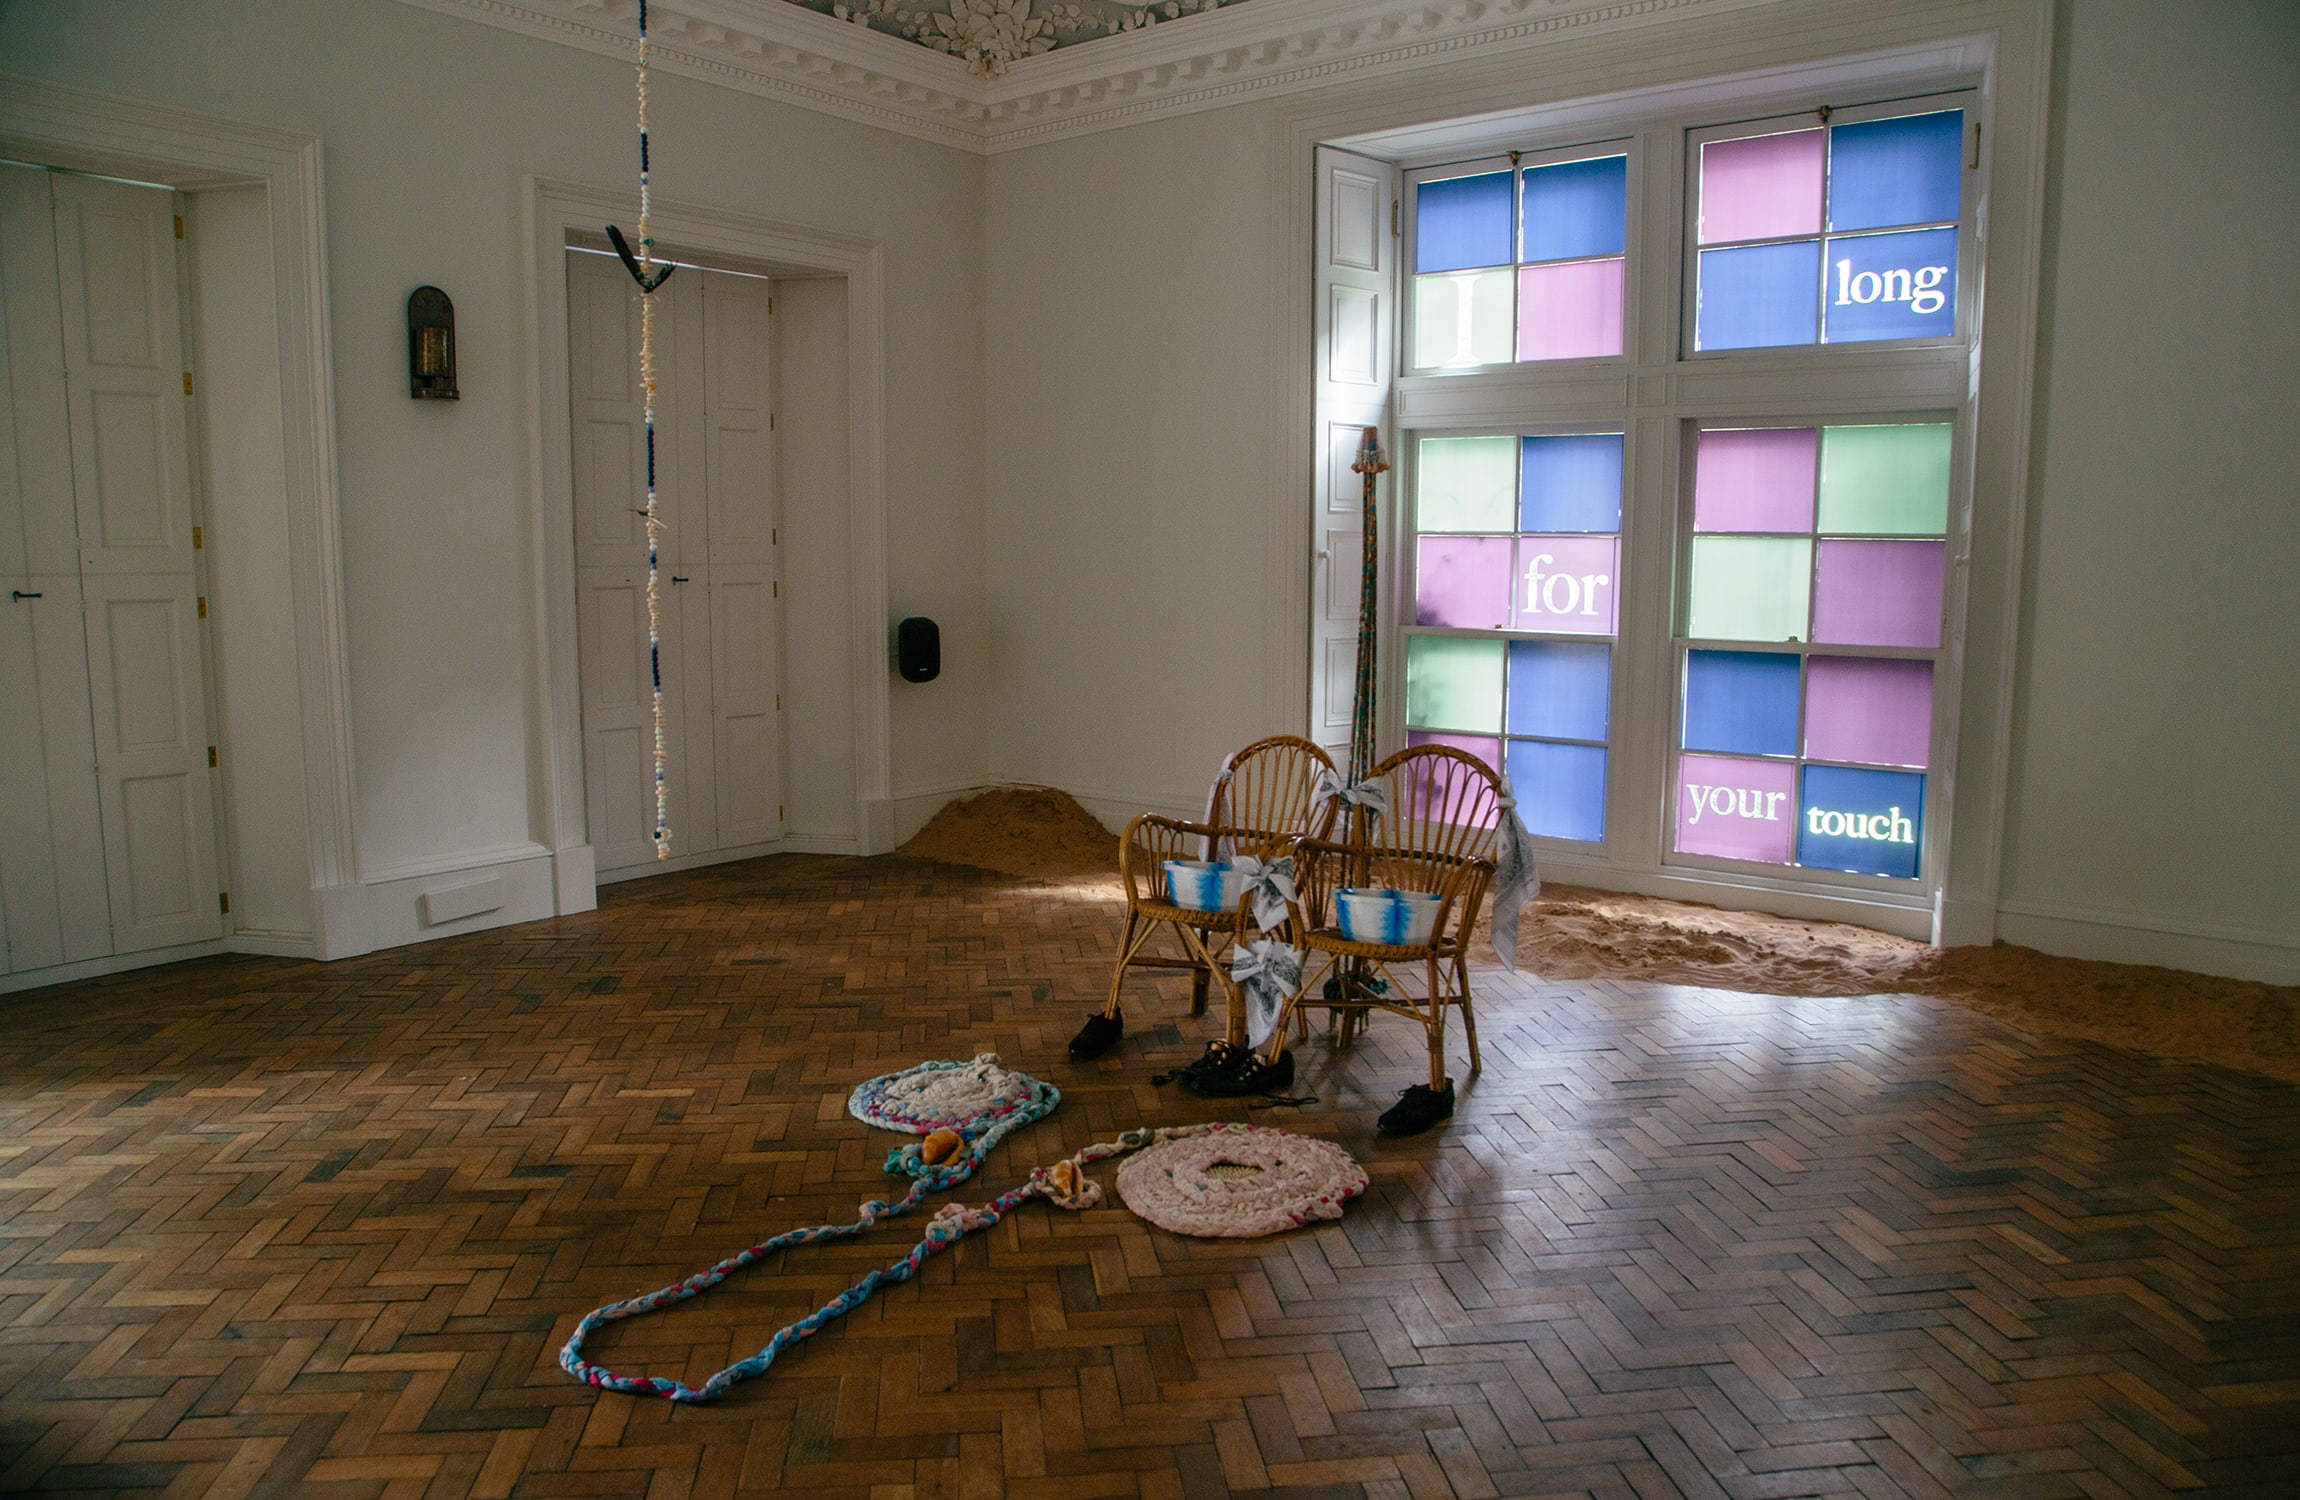 Alberta Whittle. Installation view RESET’, Jupiter Artland, Edinburgh, 2021. Courtesy of the Artist and The Modern Institute/ Toby Webster Ltd., Glasgow. Photograph by Amelia Claudia.